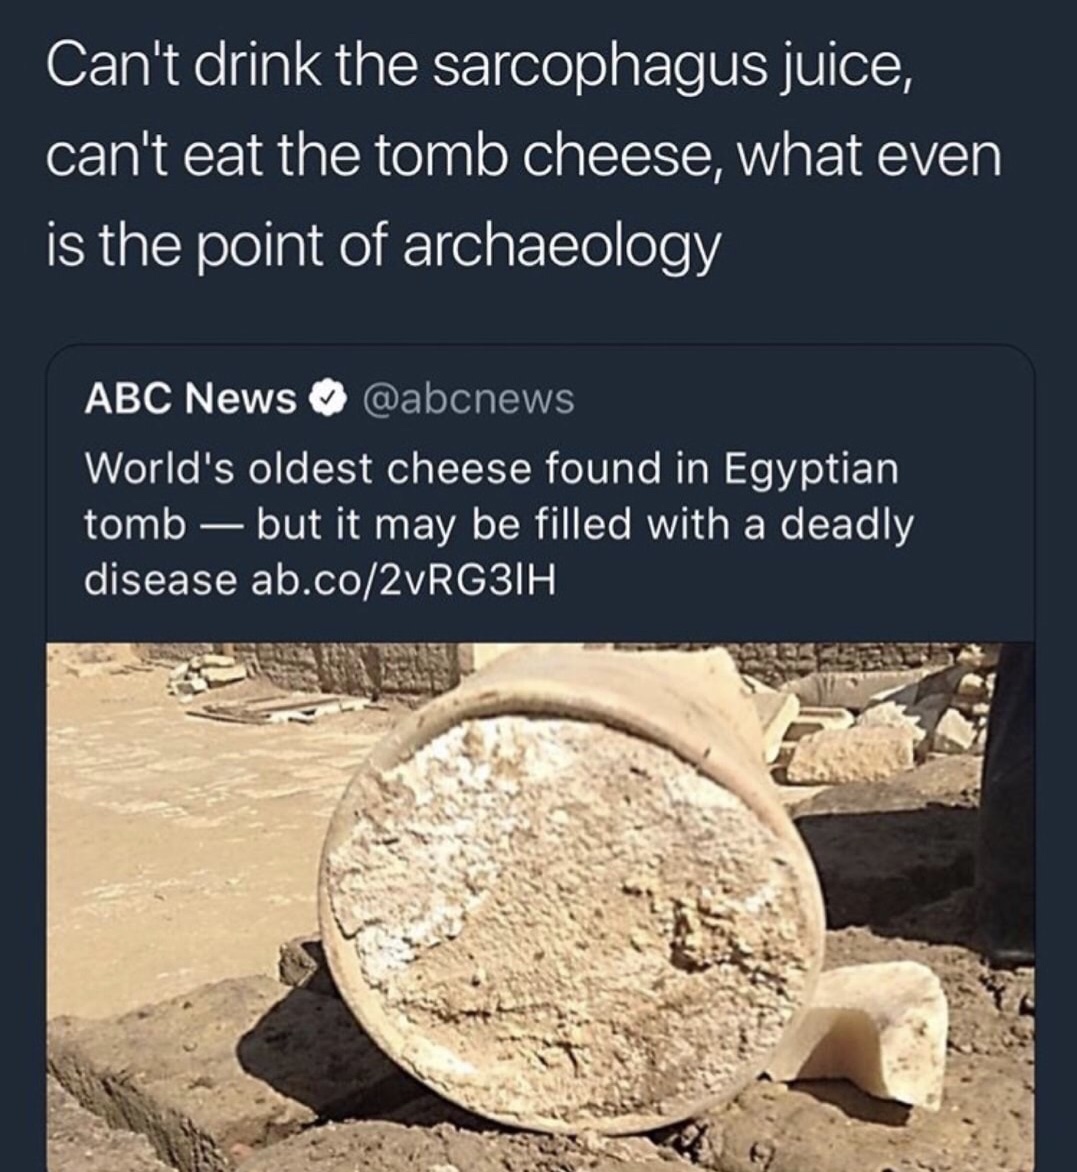 memes - oldest cheese - Can't drink the sarcophagus juice, can't eat the tomb cheese, what even is the point of archaeology Abc News World's oldest cheese found in Egyptian tomb but it may be filled with a deadly disease ab.co2vRG3IH